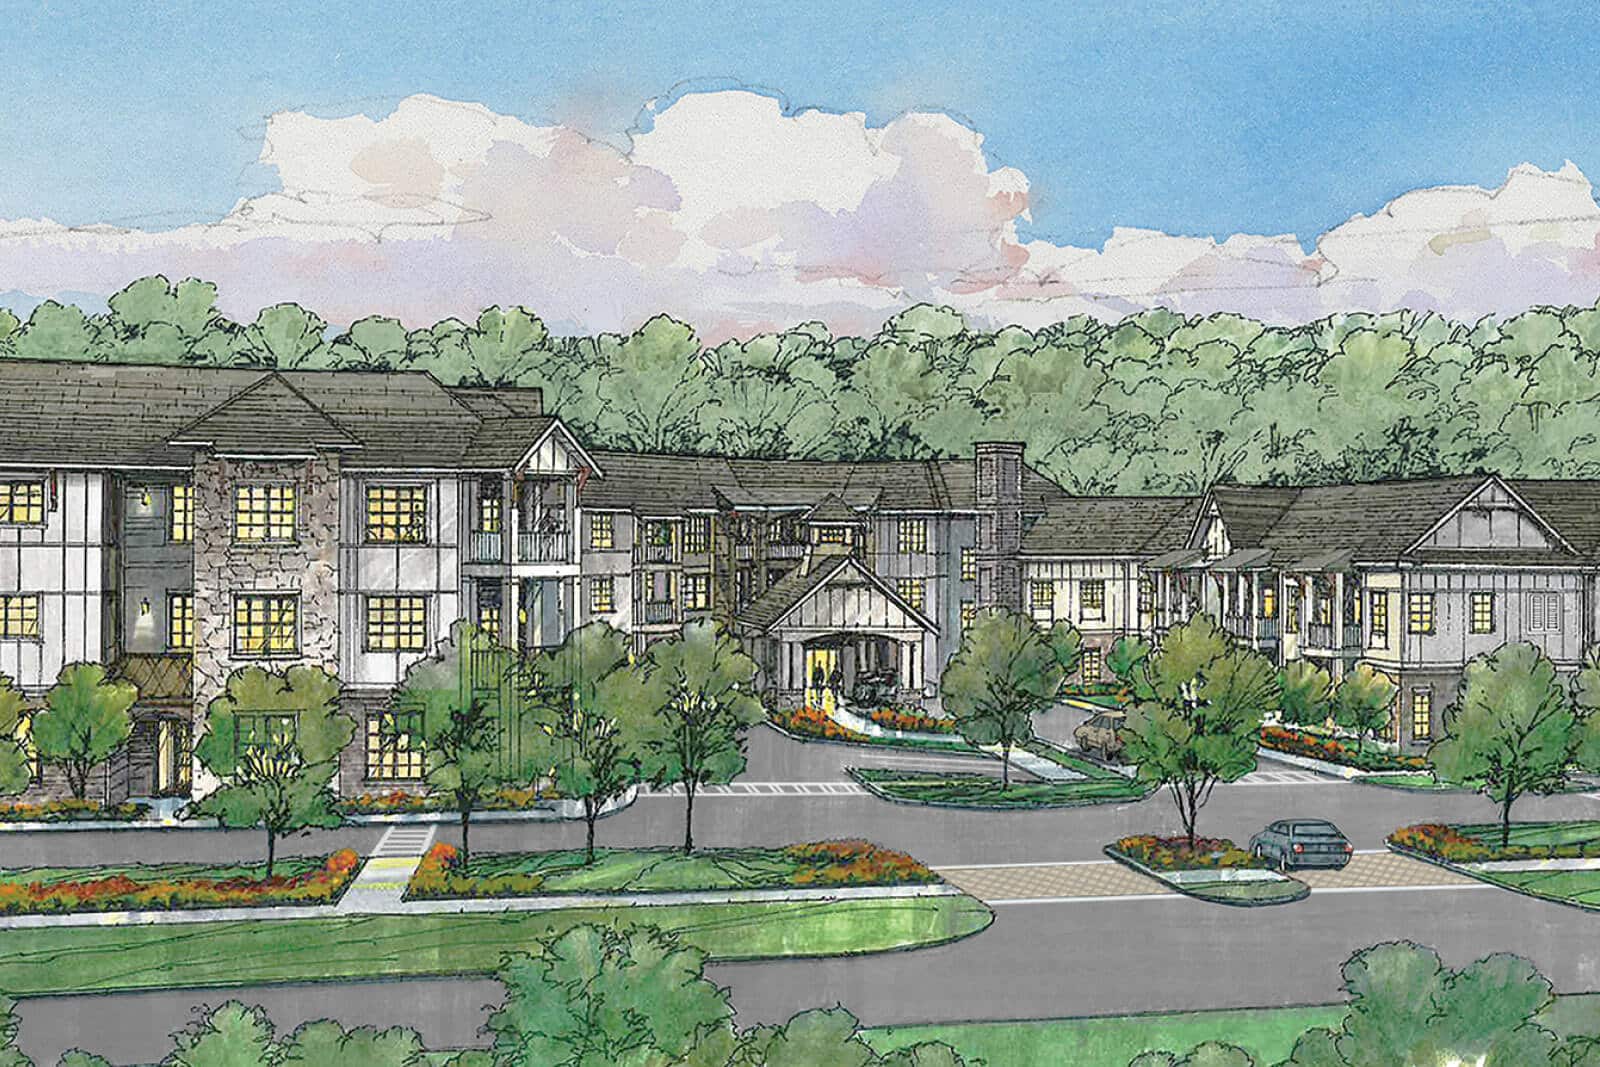 Artist's rendering of the exterior of the community.